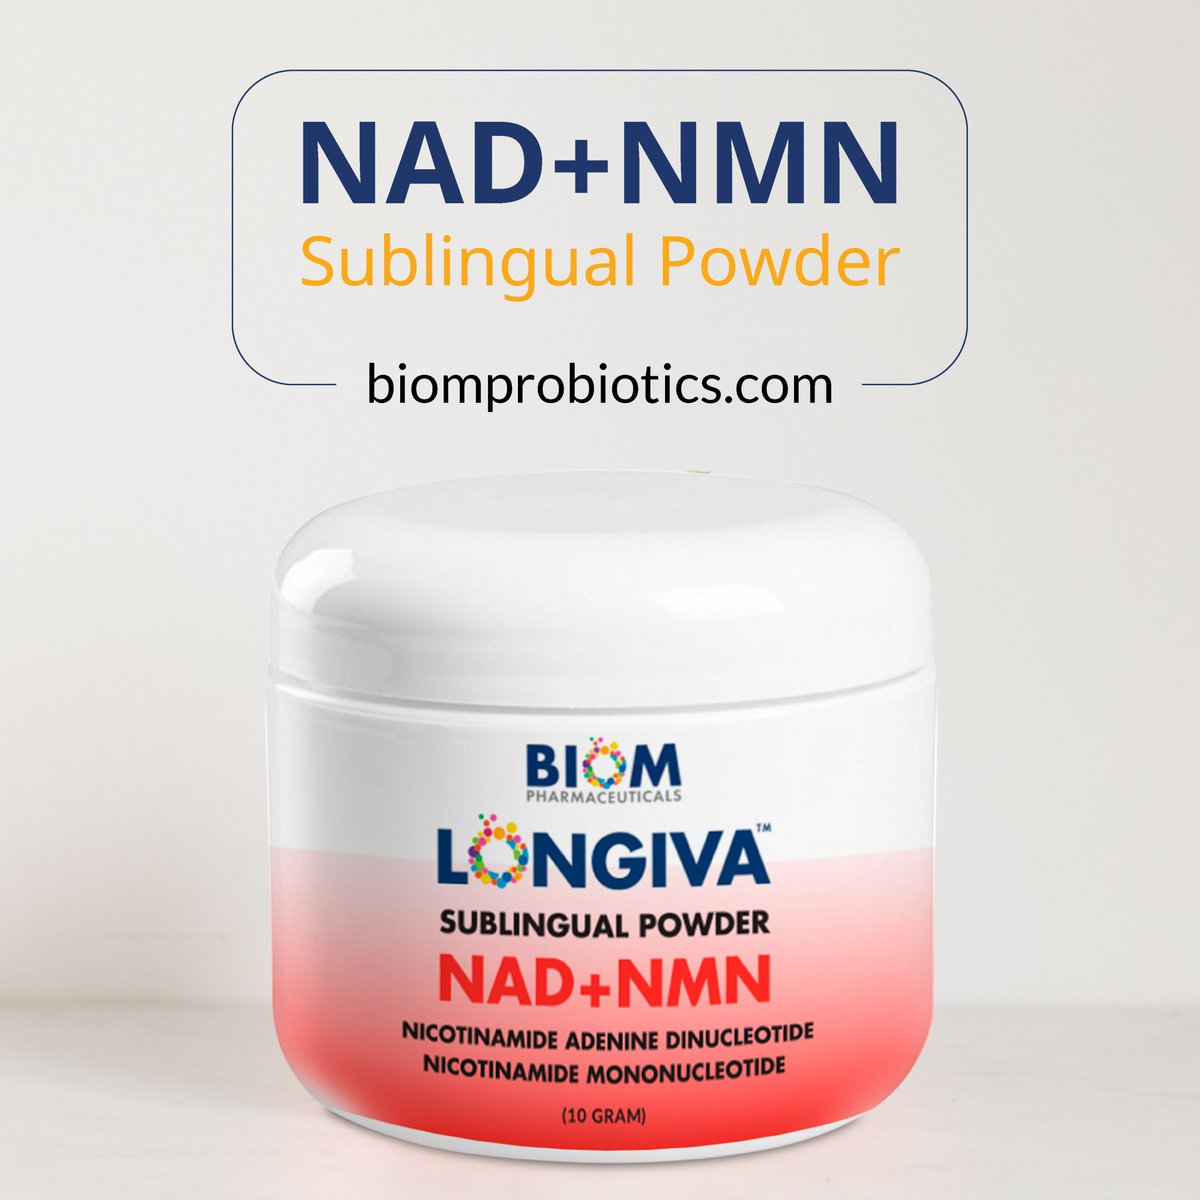 Ready to supercharge your vitality? Our NAD+NMN sublingual powder is your ticket to sustained energy and youthful living. Elevate your body's NAD+ levels, optimize cellular function, and enjoy a more vibrant life.
 
Buy: bit.ly/3PnWboh

#EnergyBoost #AntiAging #BiomNMN